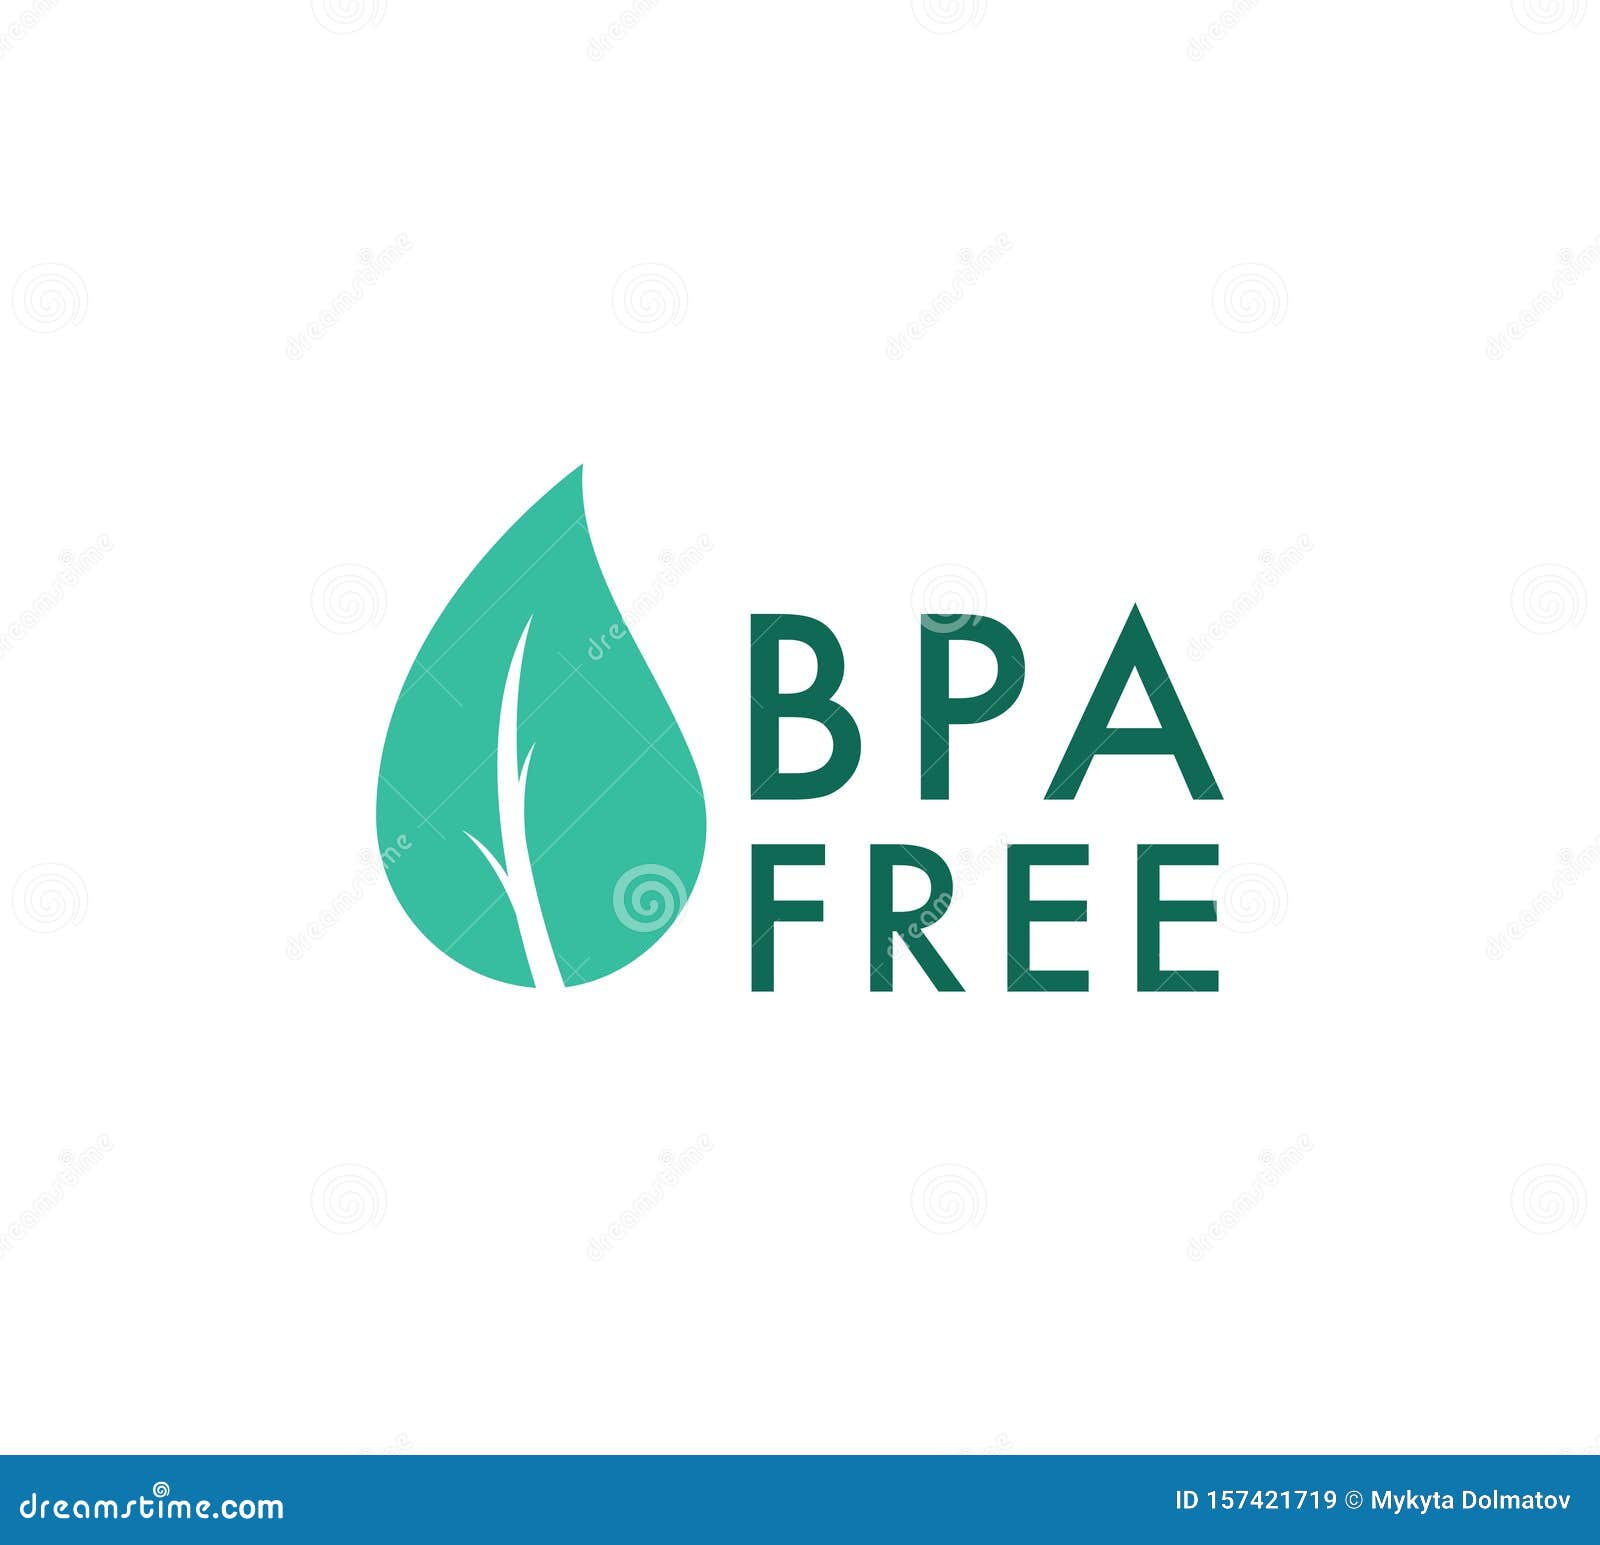 https://thumbs.dreamstime.com/z/bpa-free-vector-icon-safe-food-package-stamp-healthy-bpa-free-check-mark-leaf-drop-seal-no-toxic-approved-icon-environment-157421719.jpg